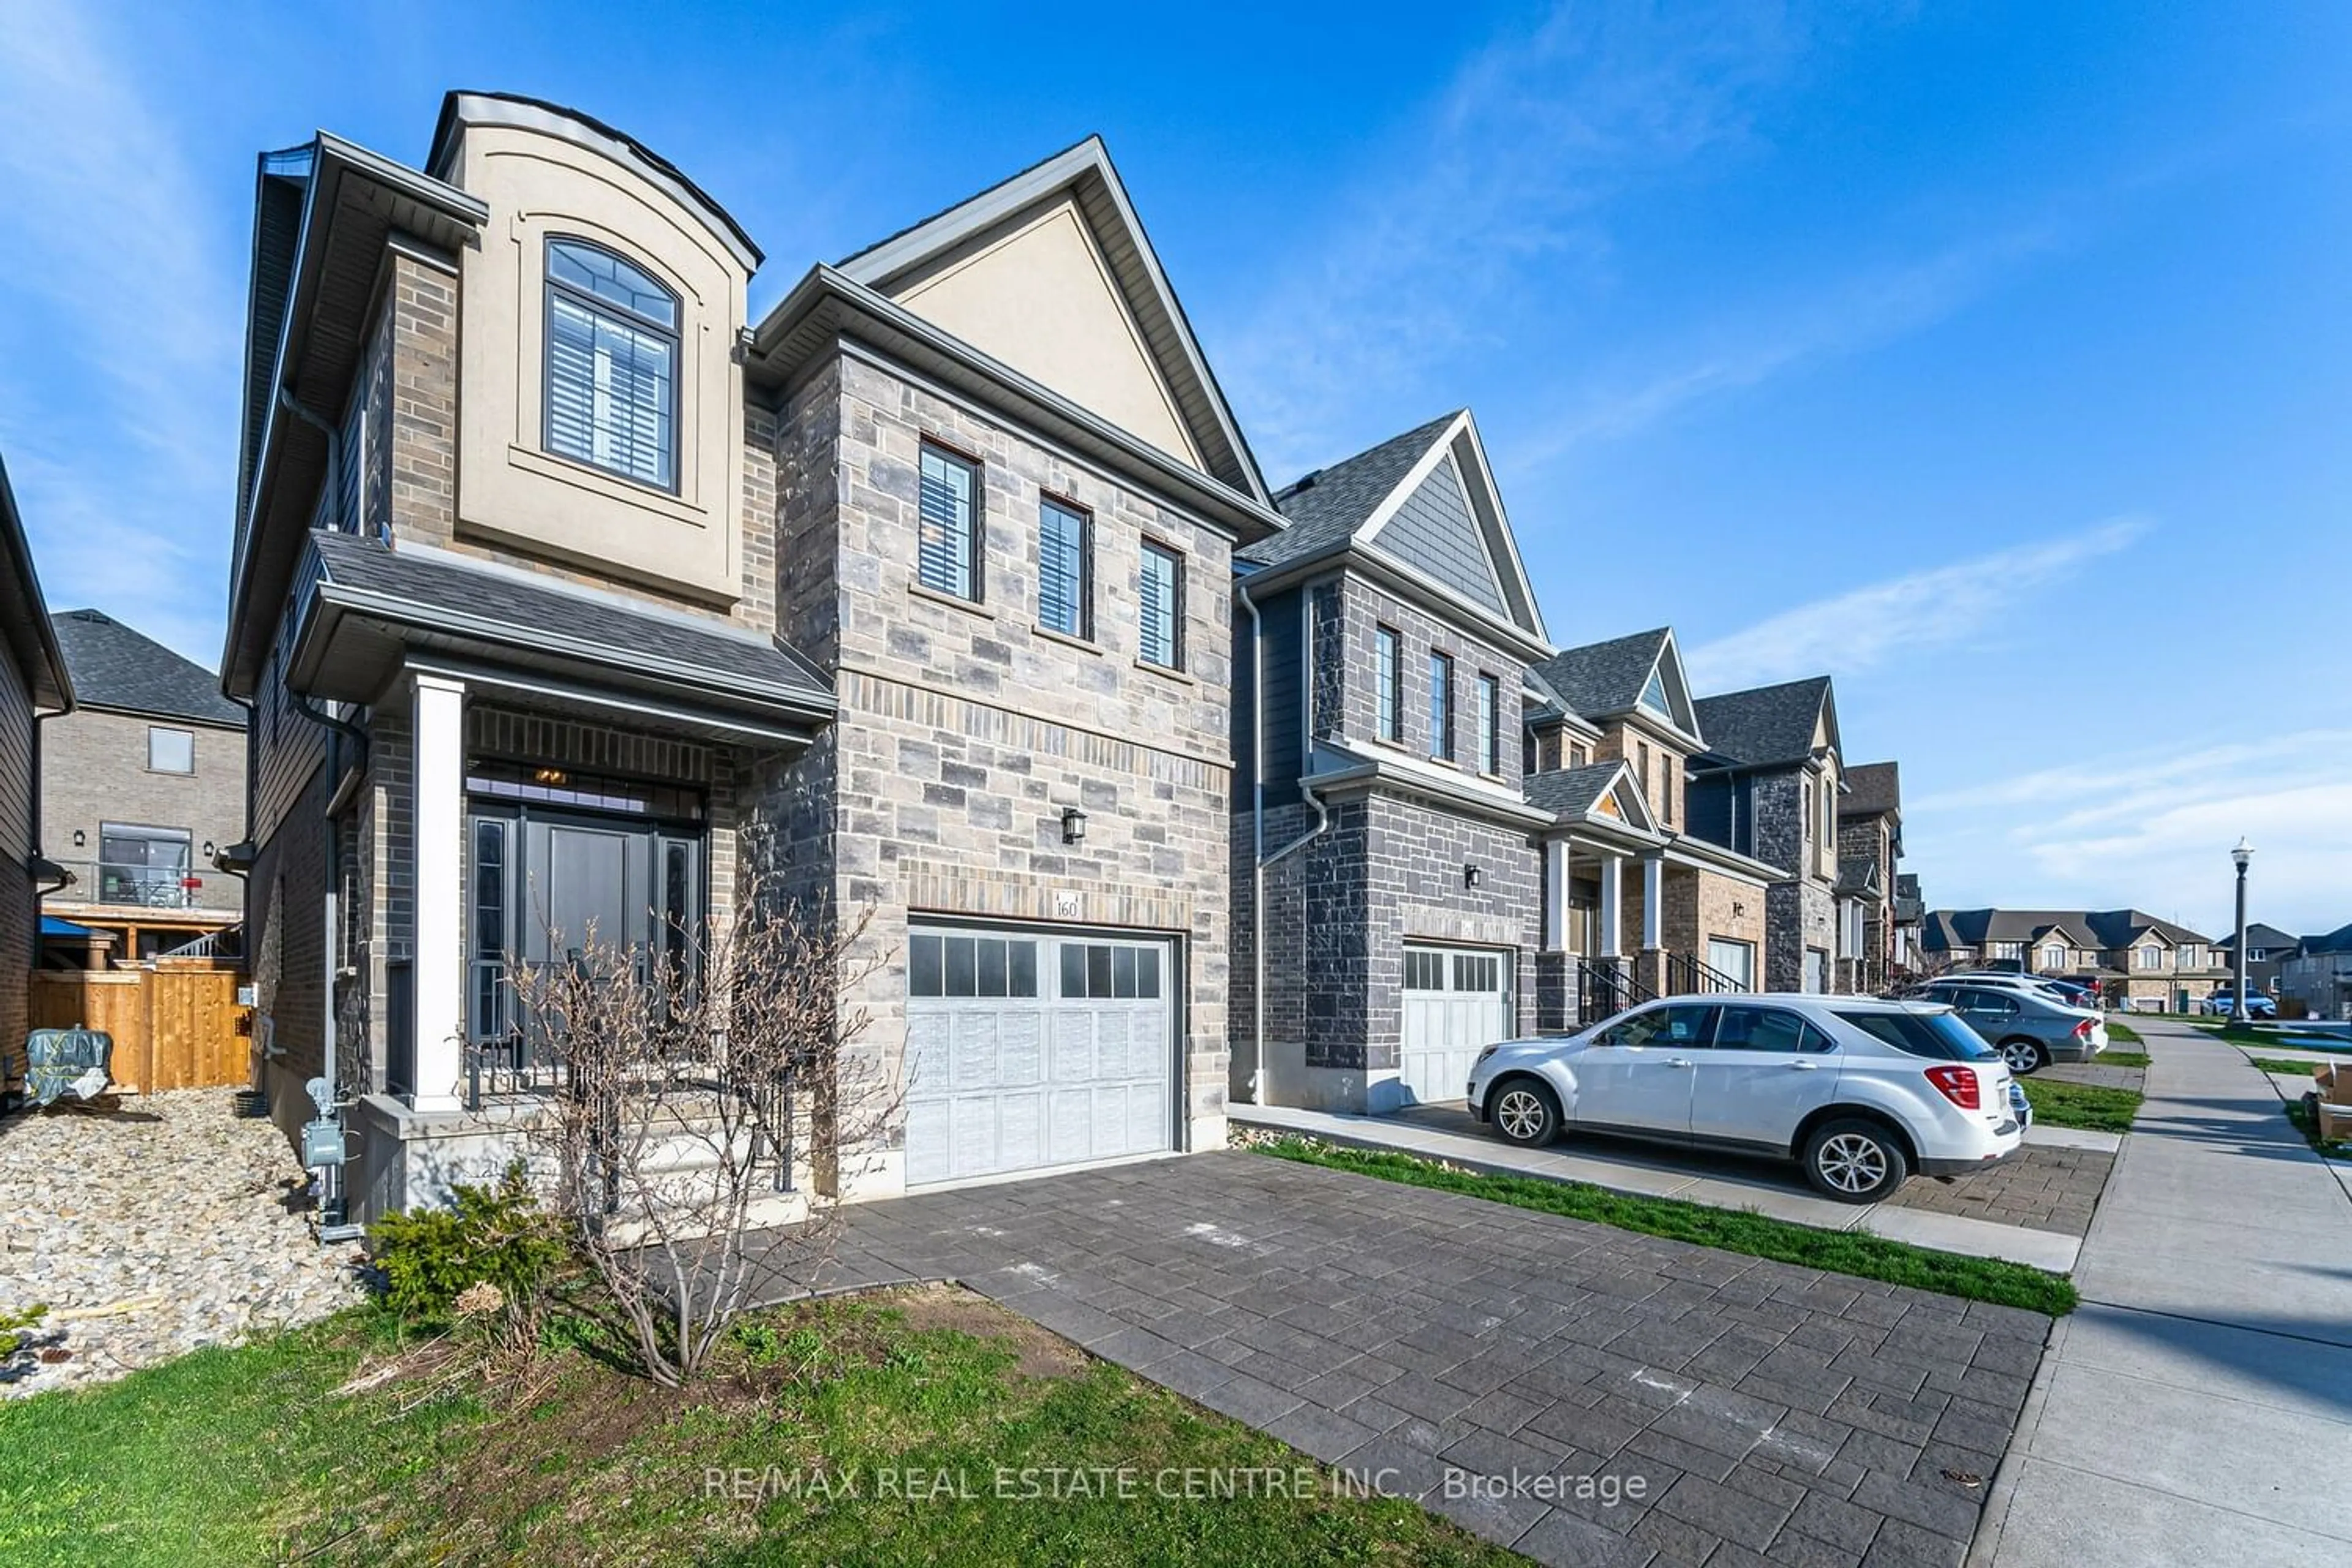 A pic from exterior of the house or condo for 160 Hollybrook Tr, Kitchener Ontario N2R 0M2